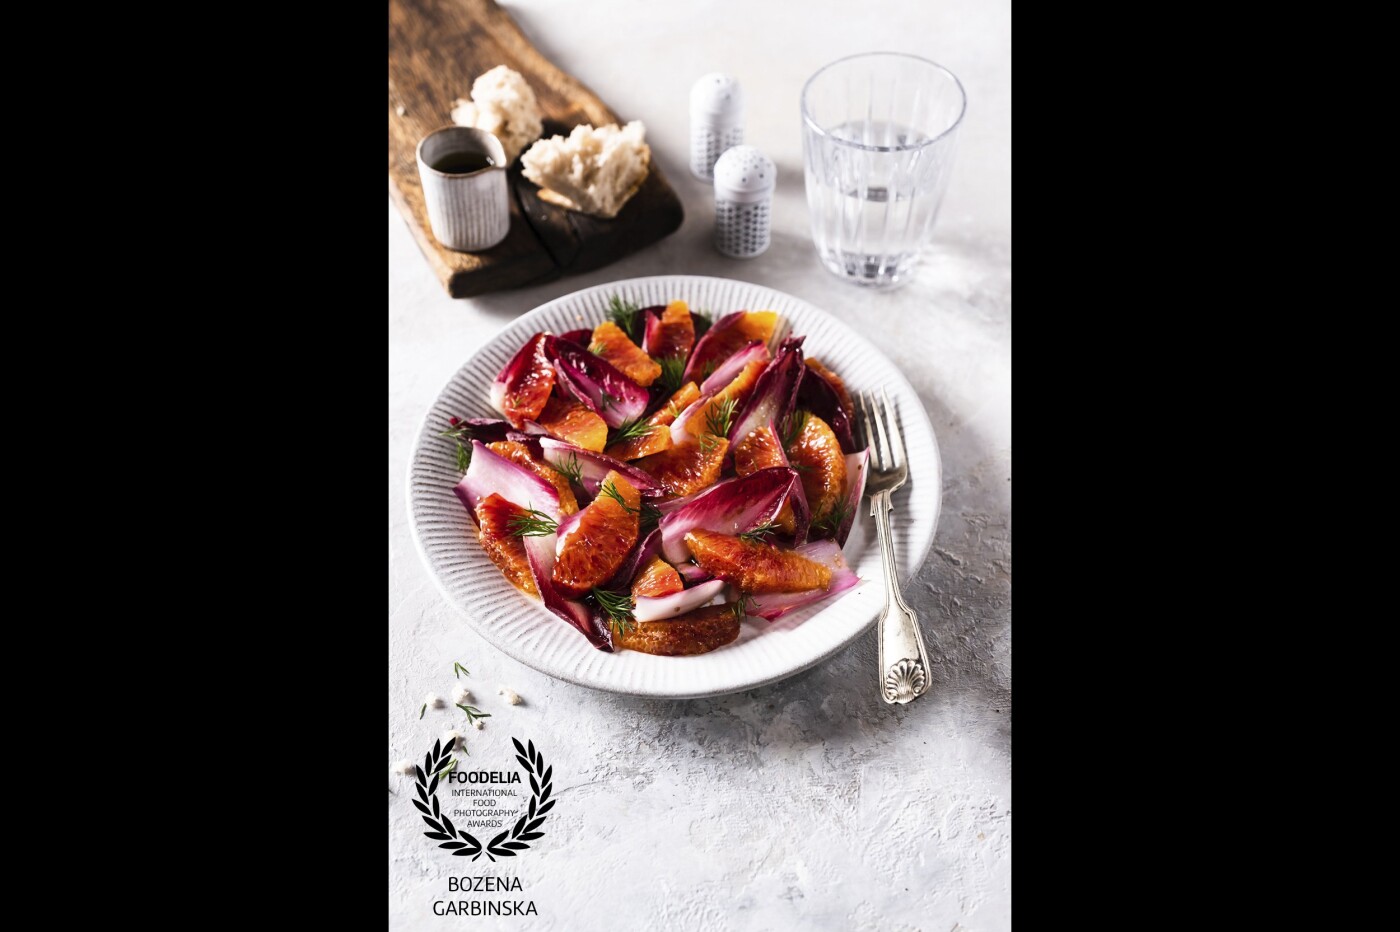 Blood orange and red chicory salad impress with color. It's refreshing. <br />
Camera: Fuji X-T3<br />
Lens: Fujinon 16-55 mm<br />
Settings: ISO 160, 31,1 mm, f/3.6, 1/6 sec, tripod, artificial light